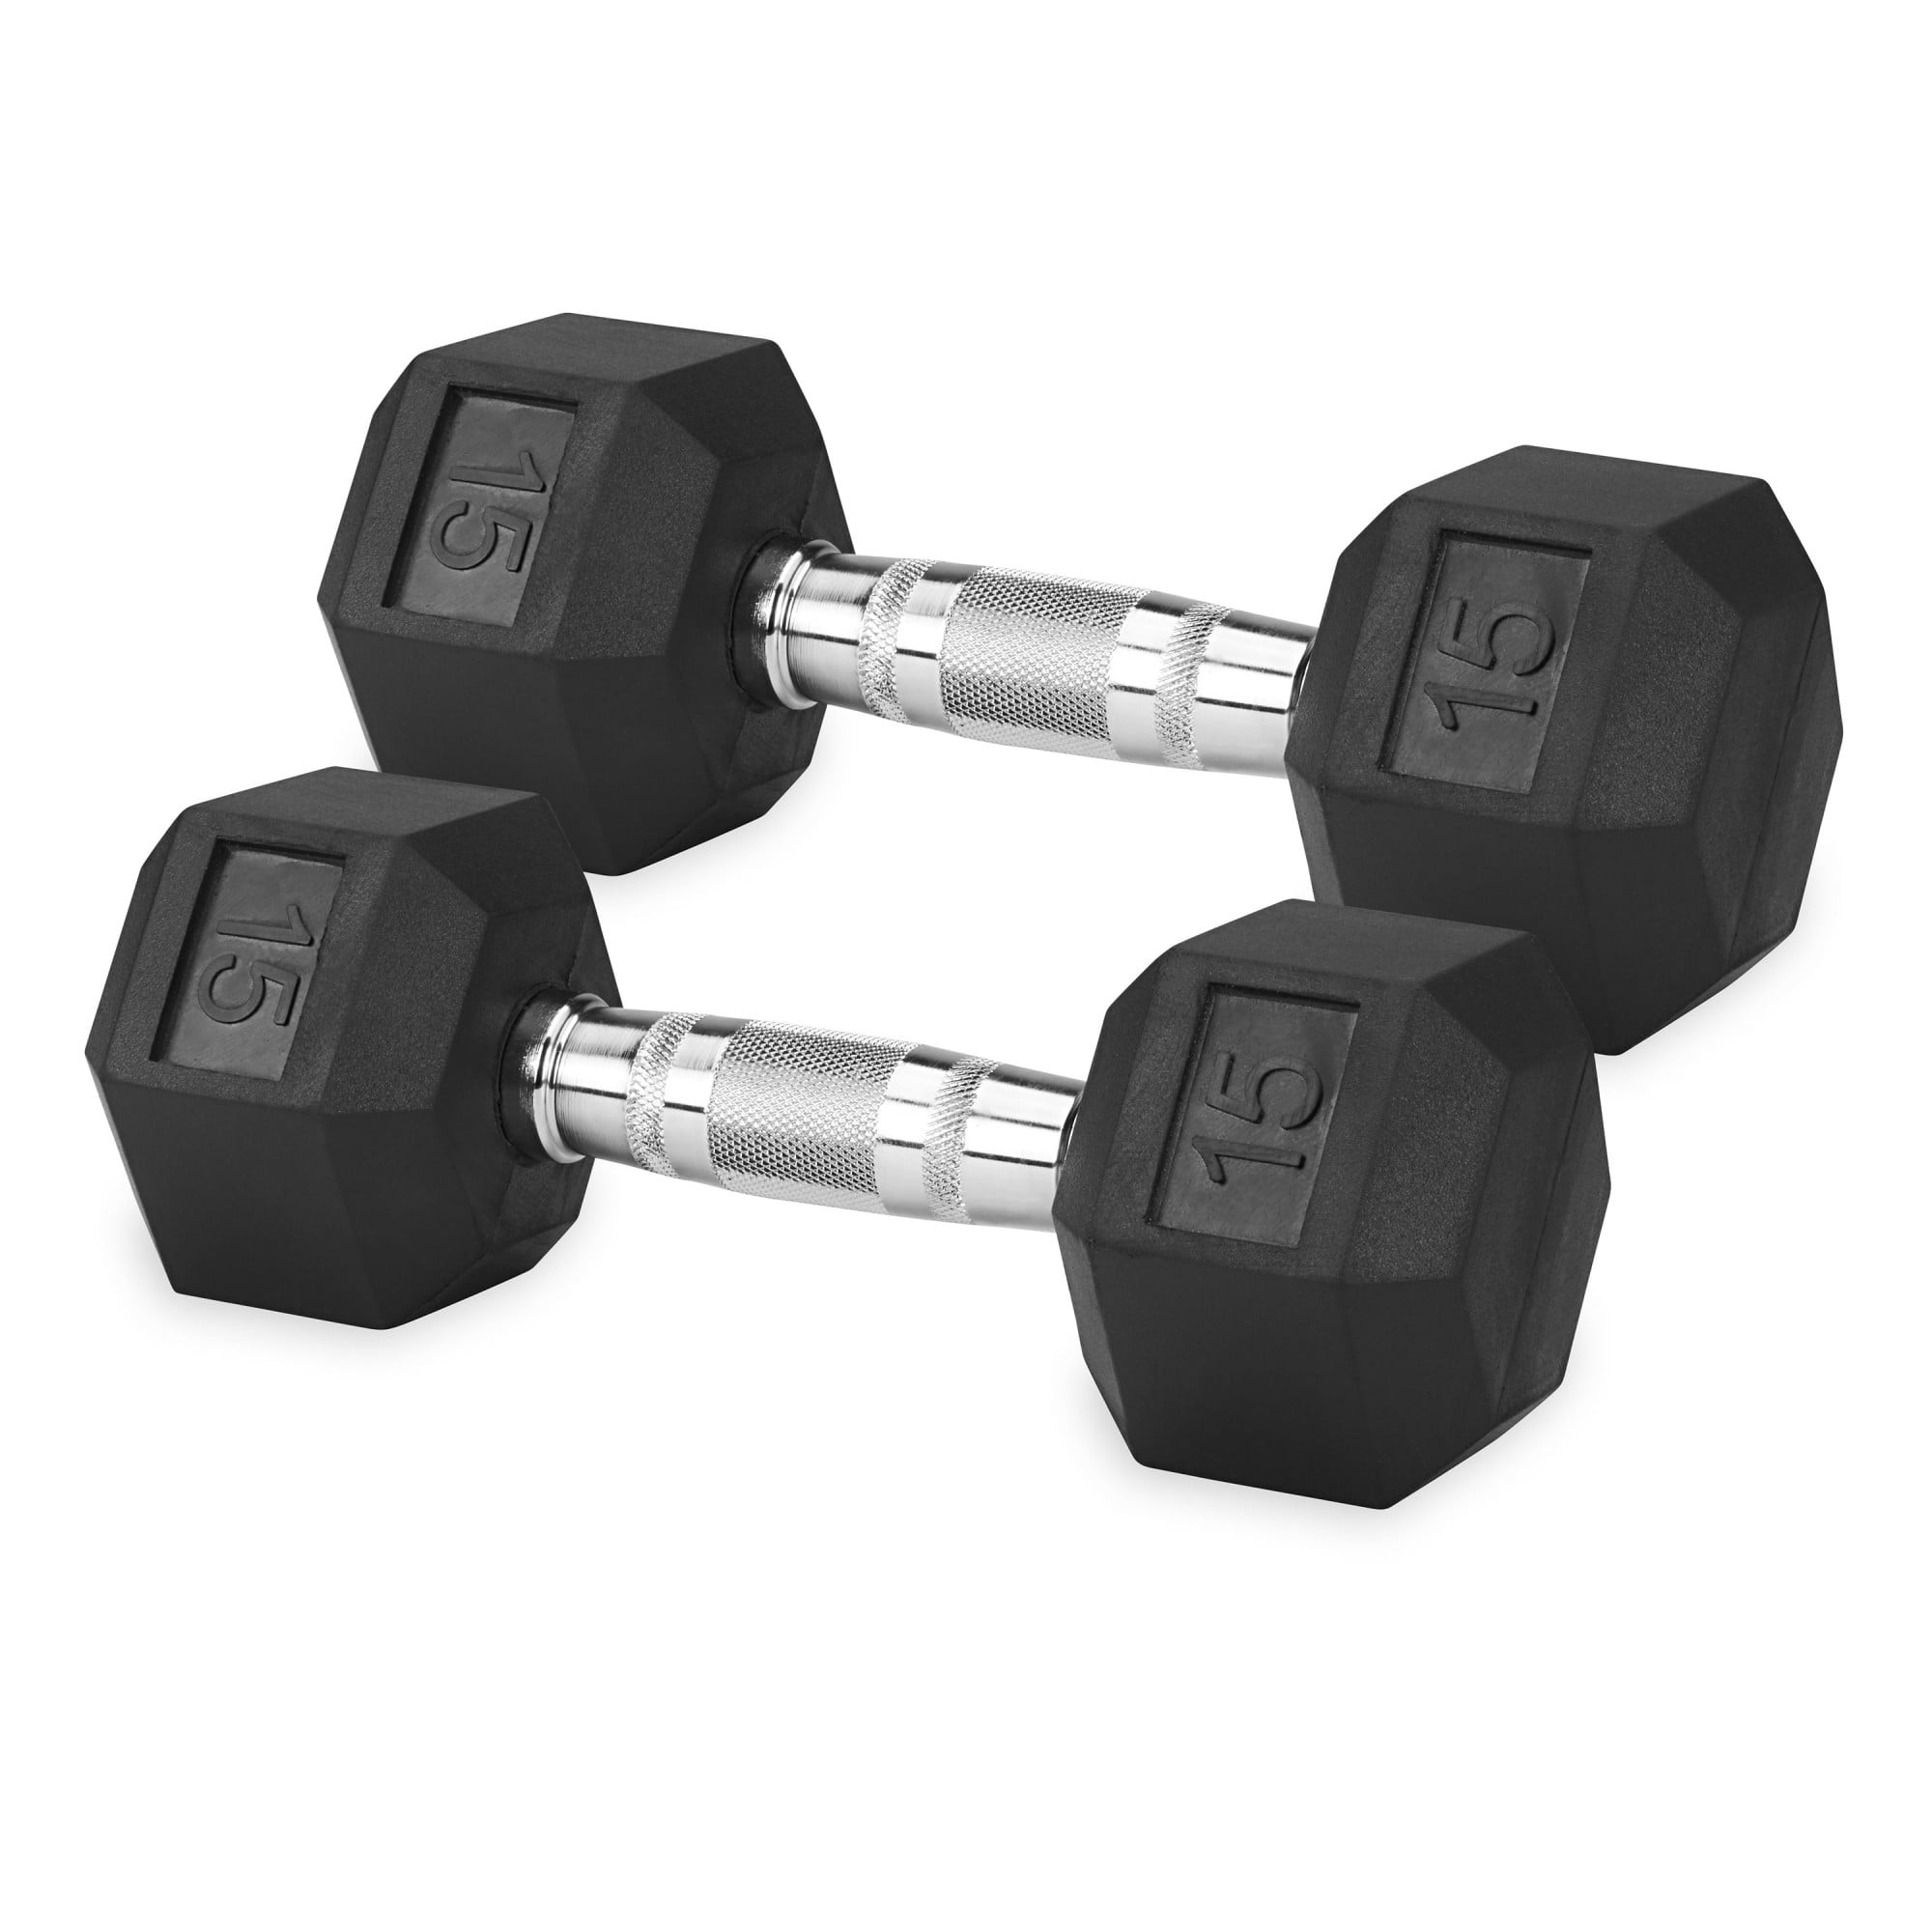 Well-Fit Rubber Hex Dumbbell Set, 10lb Black, Includes Two Weights